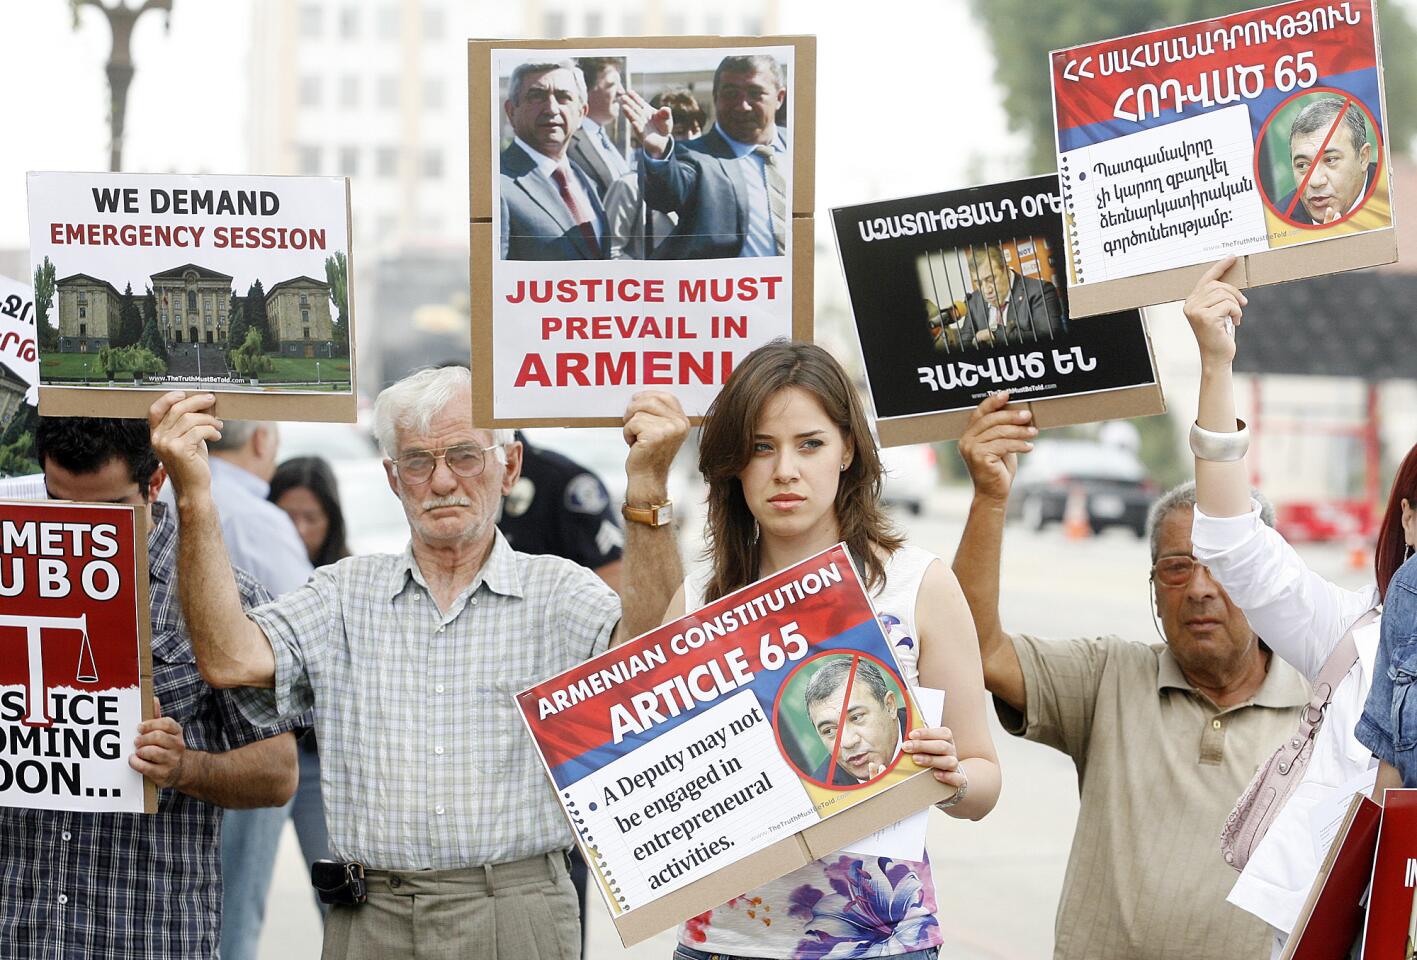 Photo Gallery: Armenian protest for prosecution of Nemets Robu